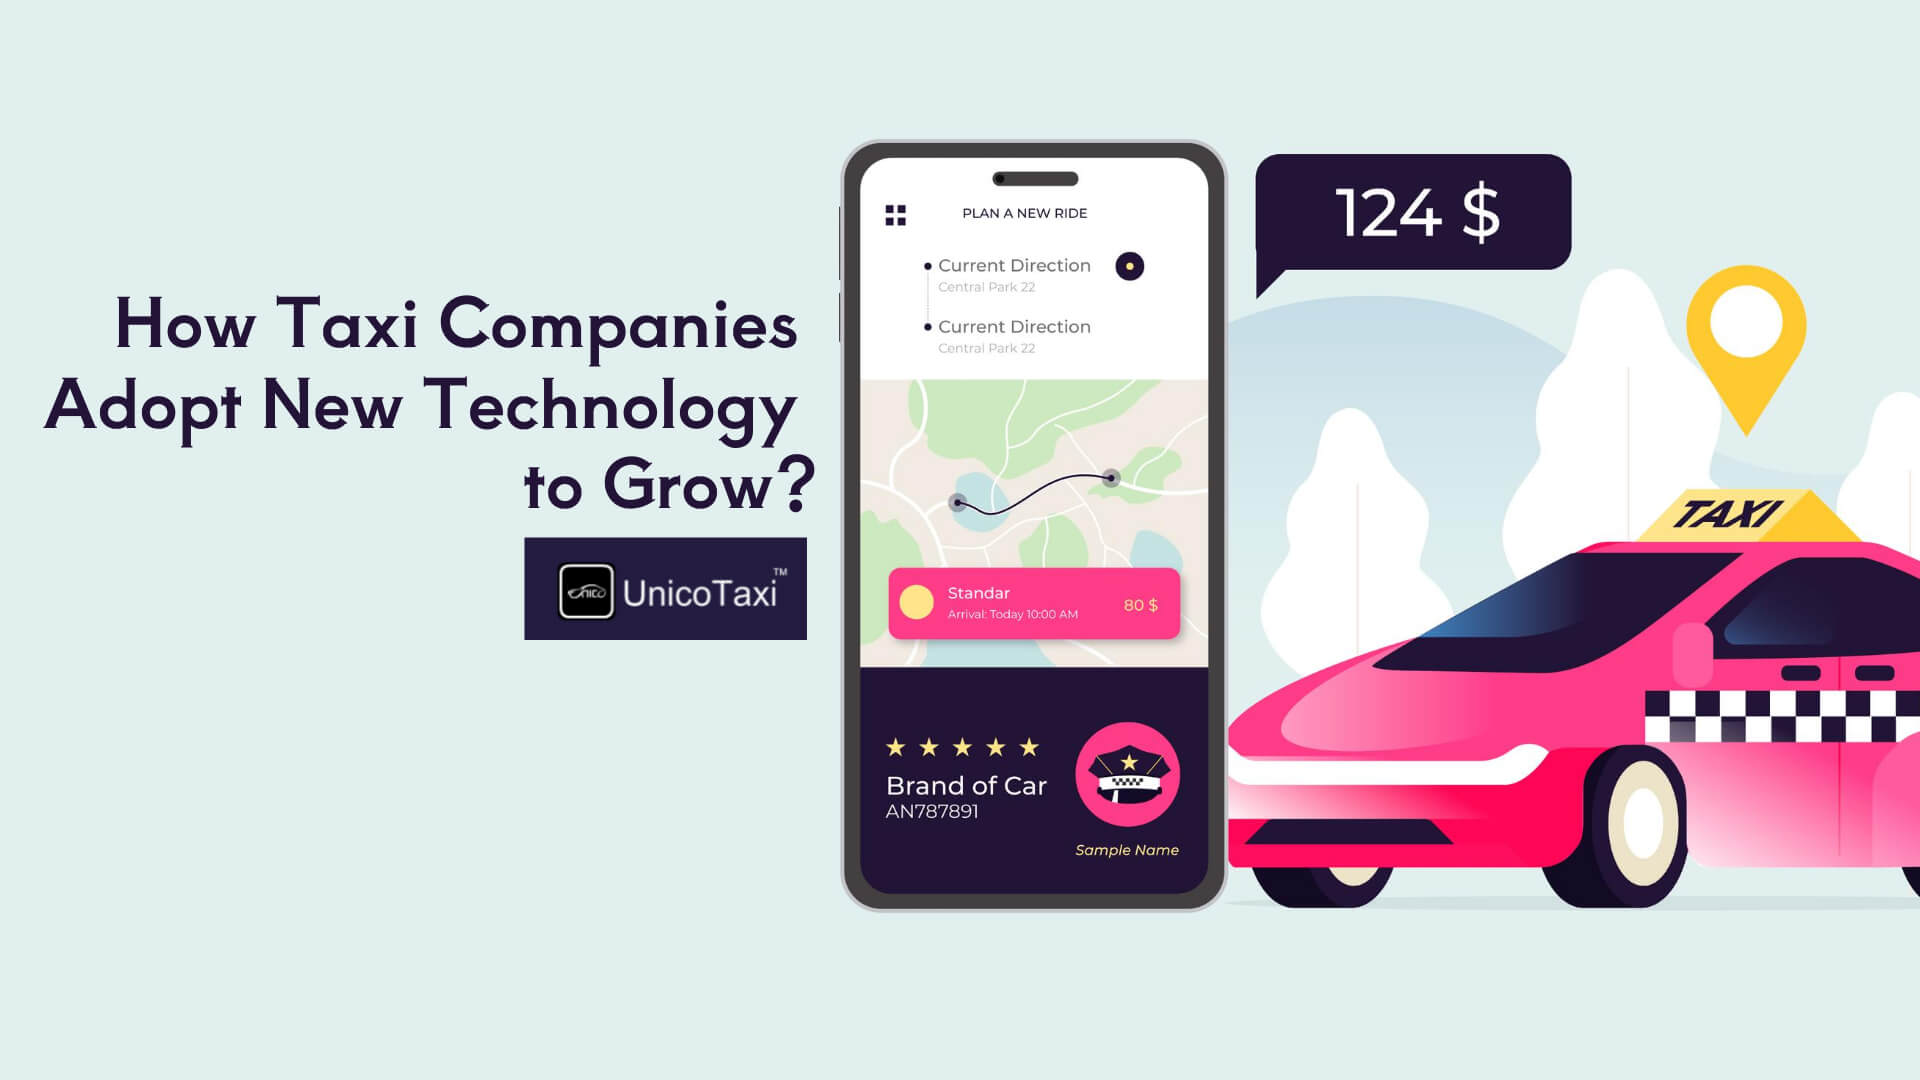 How Taxi Companies Adopt New Technology to Grow?